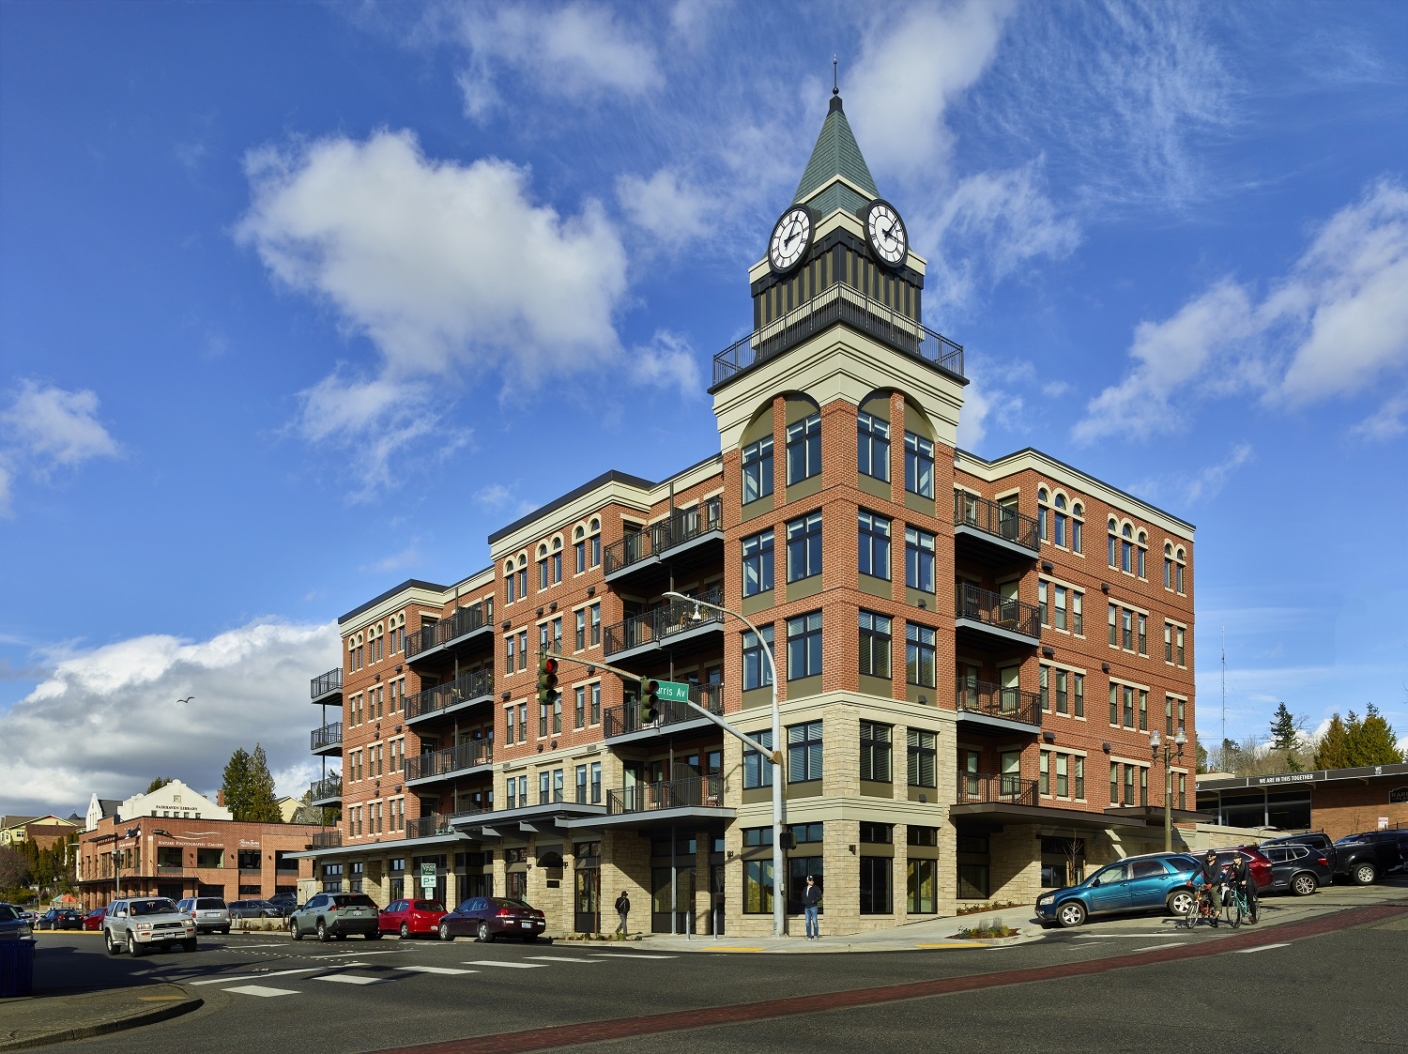 Urban, mixed-use building clad in brick on corner lot with clocktower placed at center